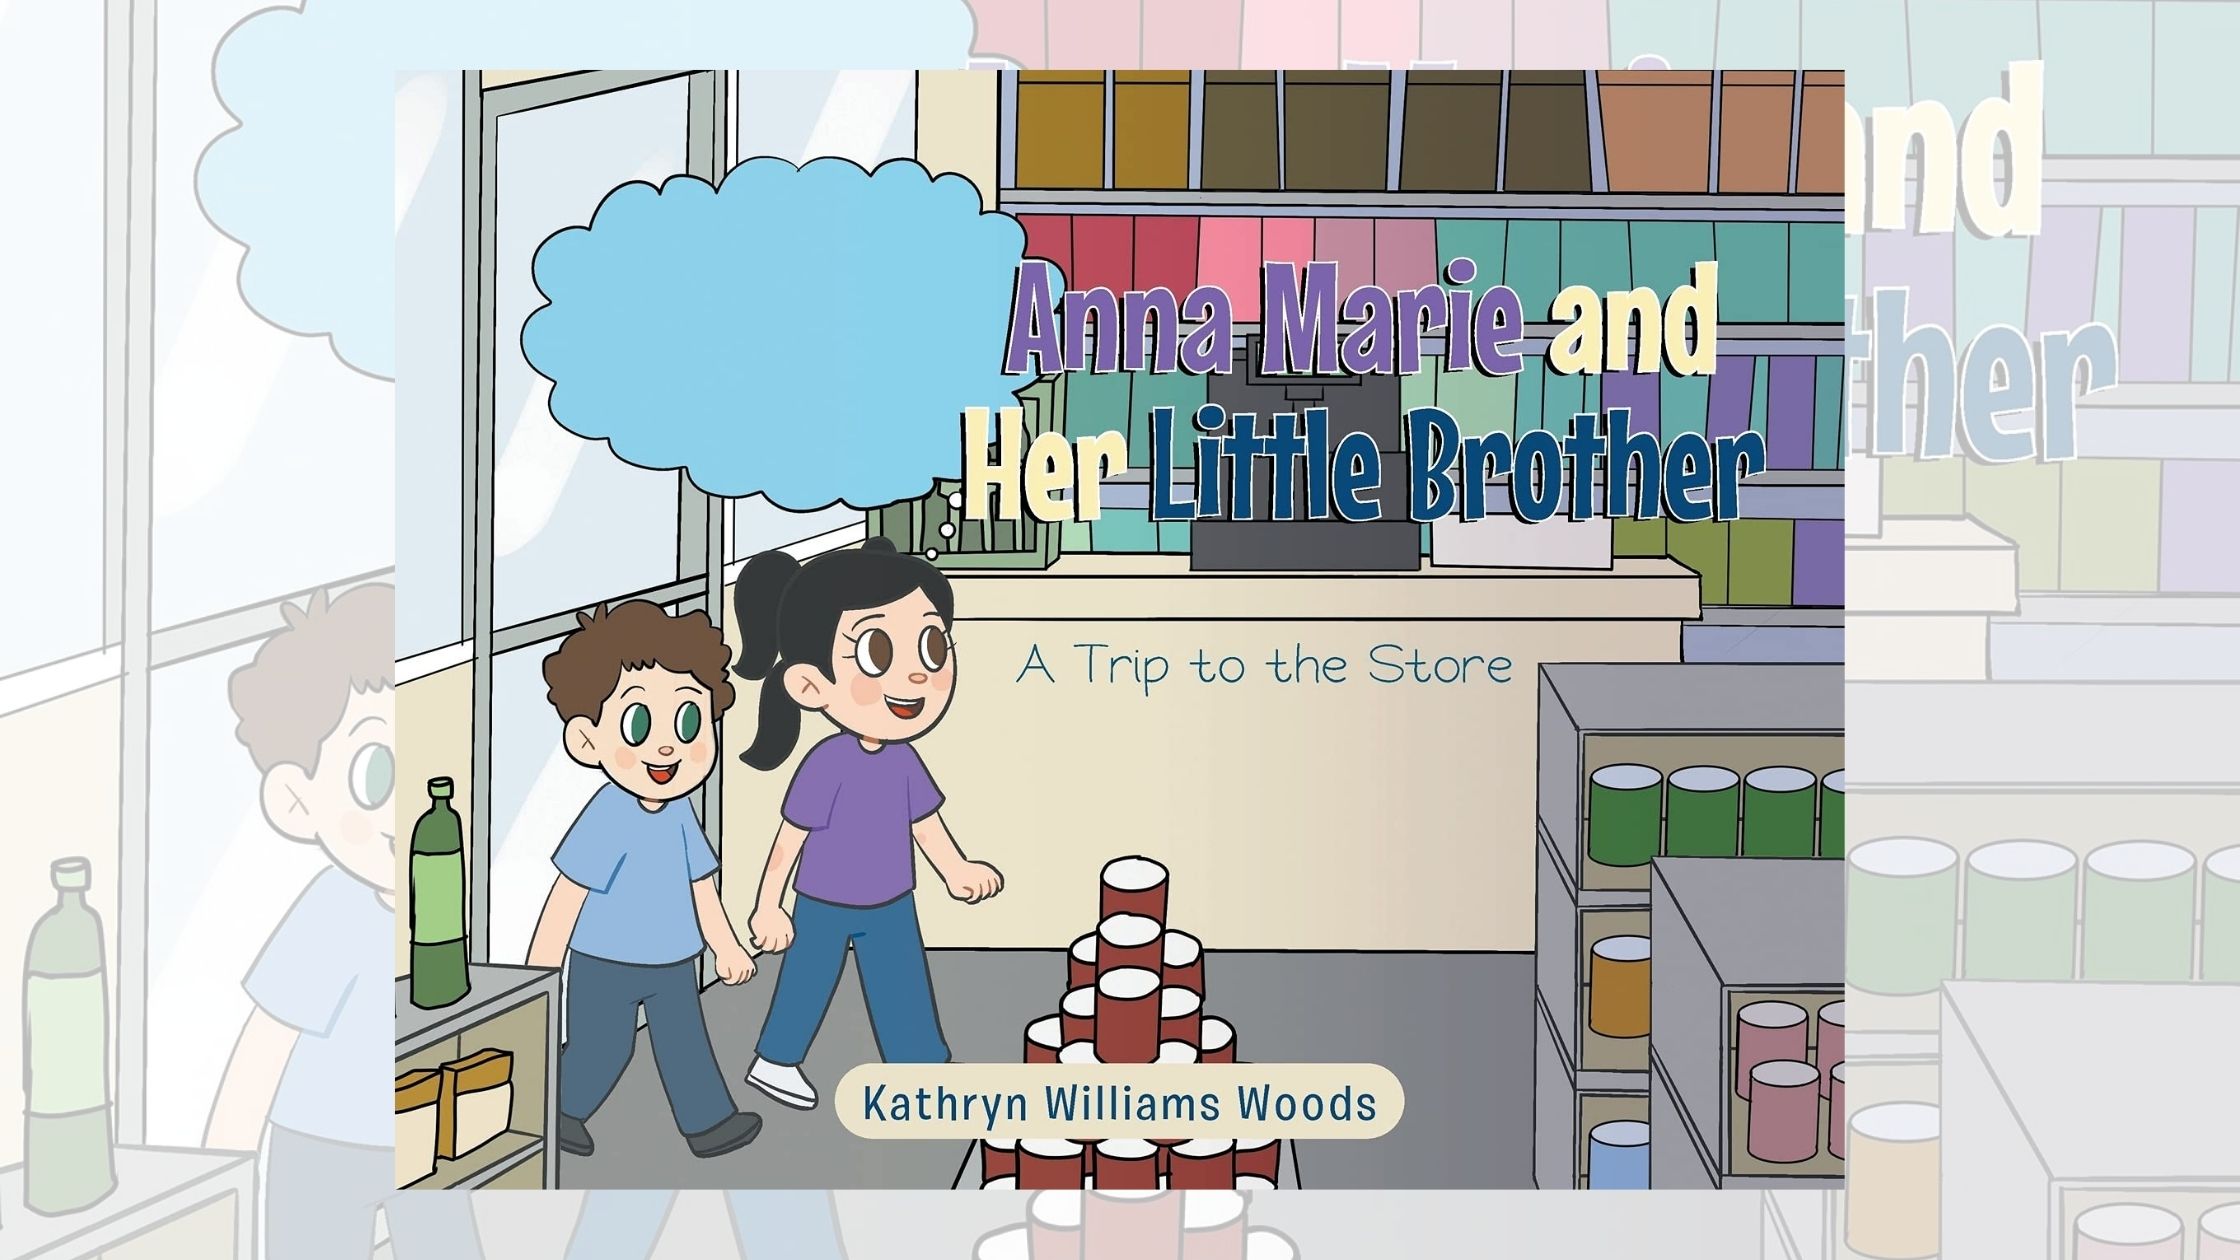 Kathryn Williams Woods’s newly released “Anna Marie and Her Little Brother: A Trip to the Store” is a sweet story with an important lesson